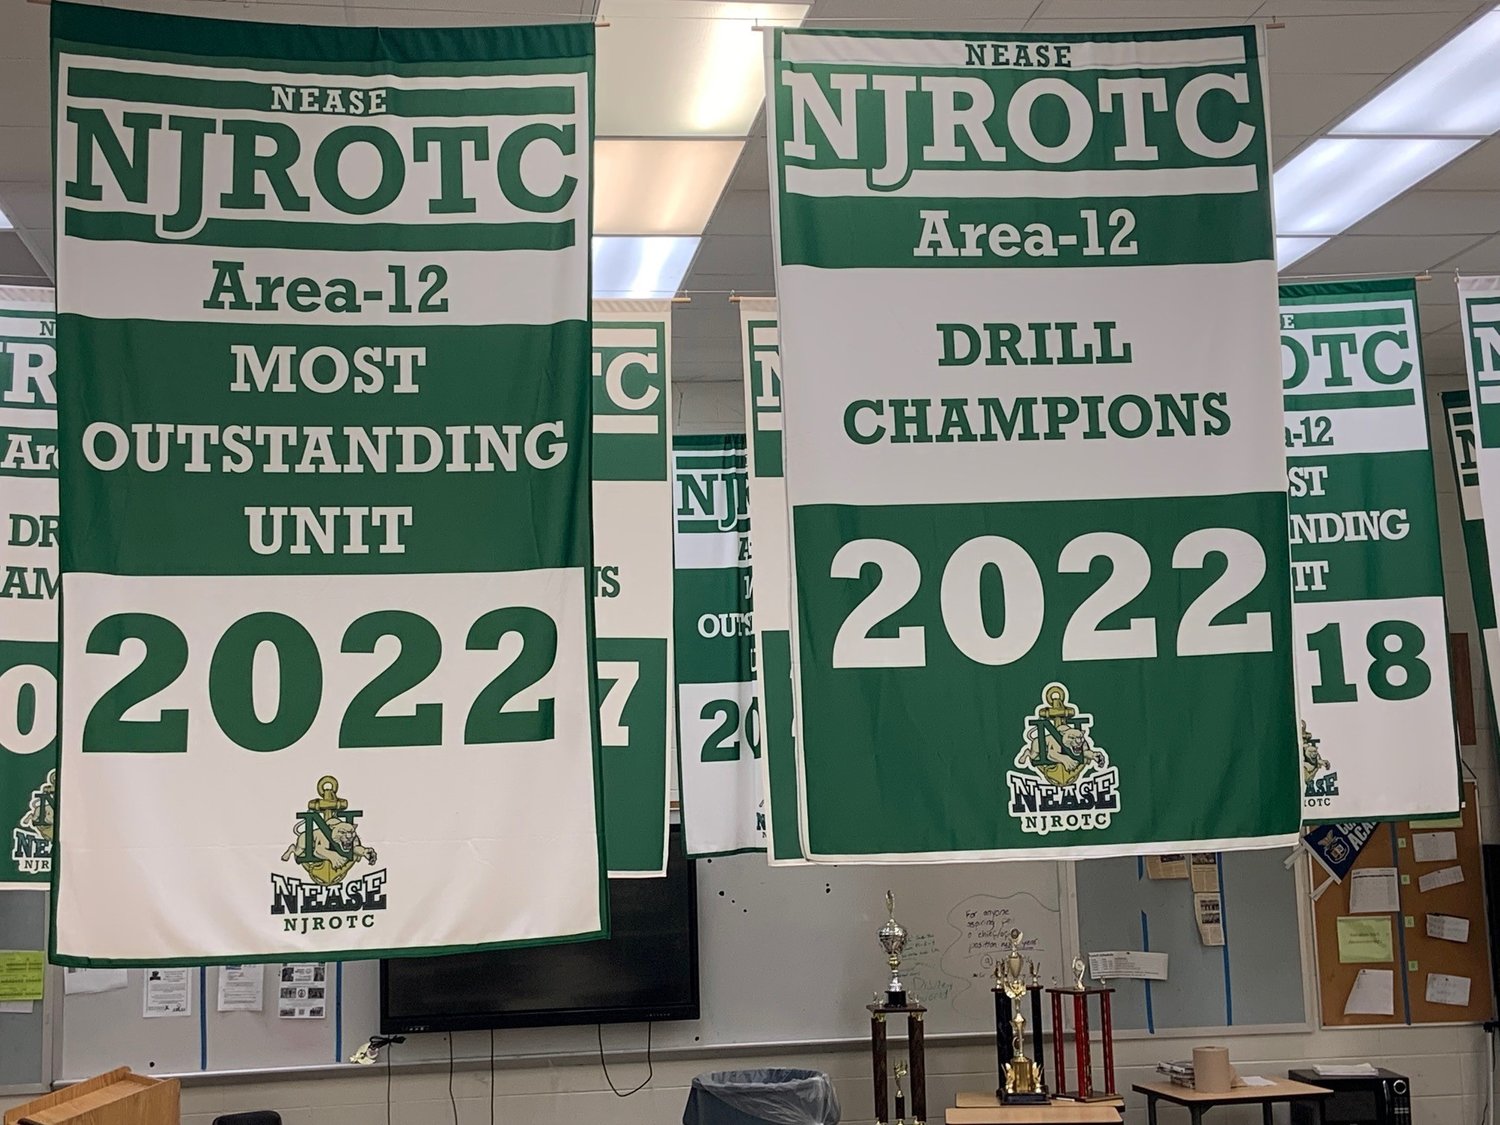 The newly raised 2022 Area-12 Most Outstanding Unit and Area-12 Drill Championship banners hang from the rafters at Nease High School.